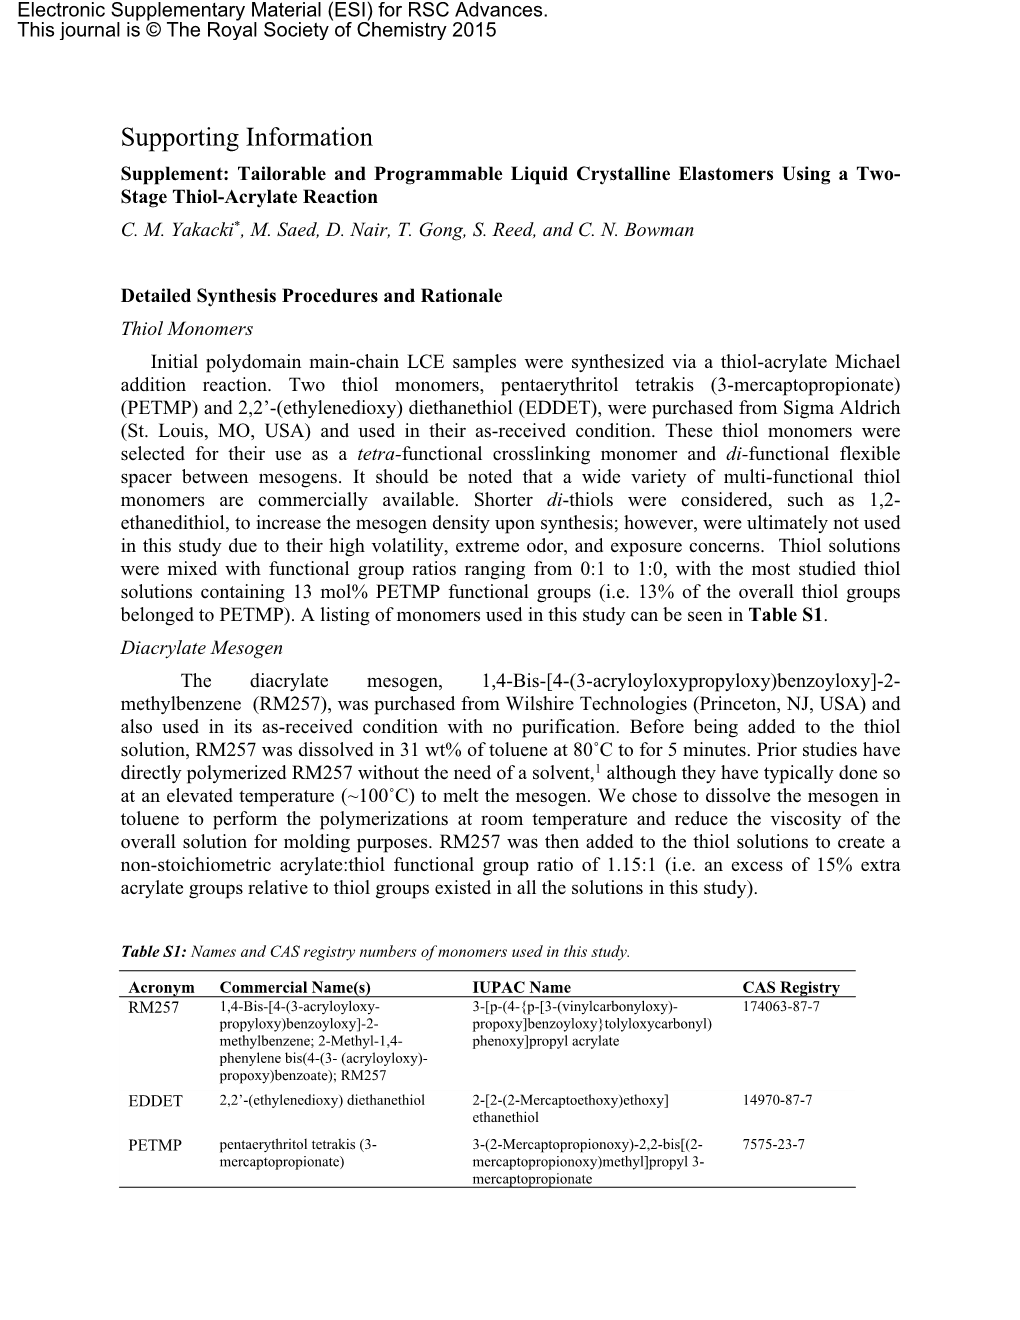 Supporting Information Supplement: Tailorable and Programmable Liquid Crystalline Elastomers Using a Two- Stage Thiol-Acrylate Reaction C